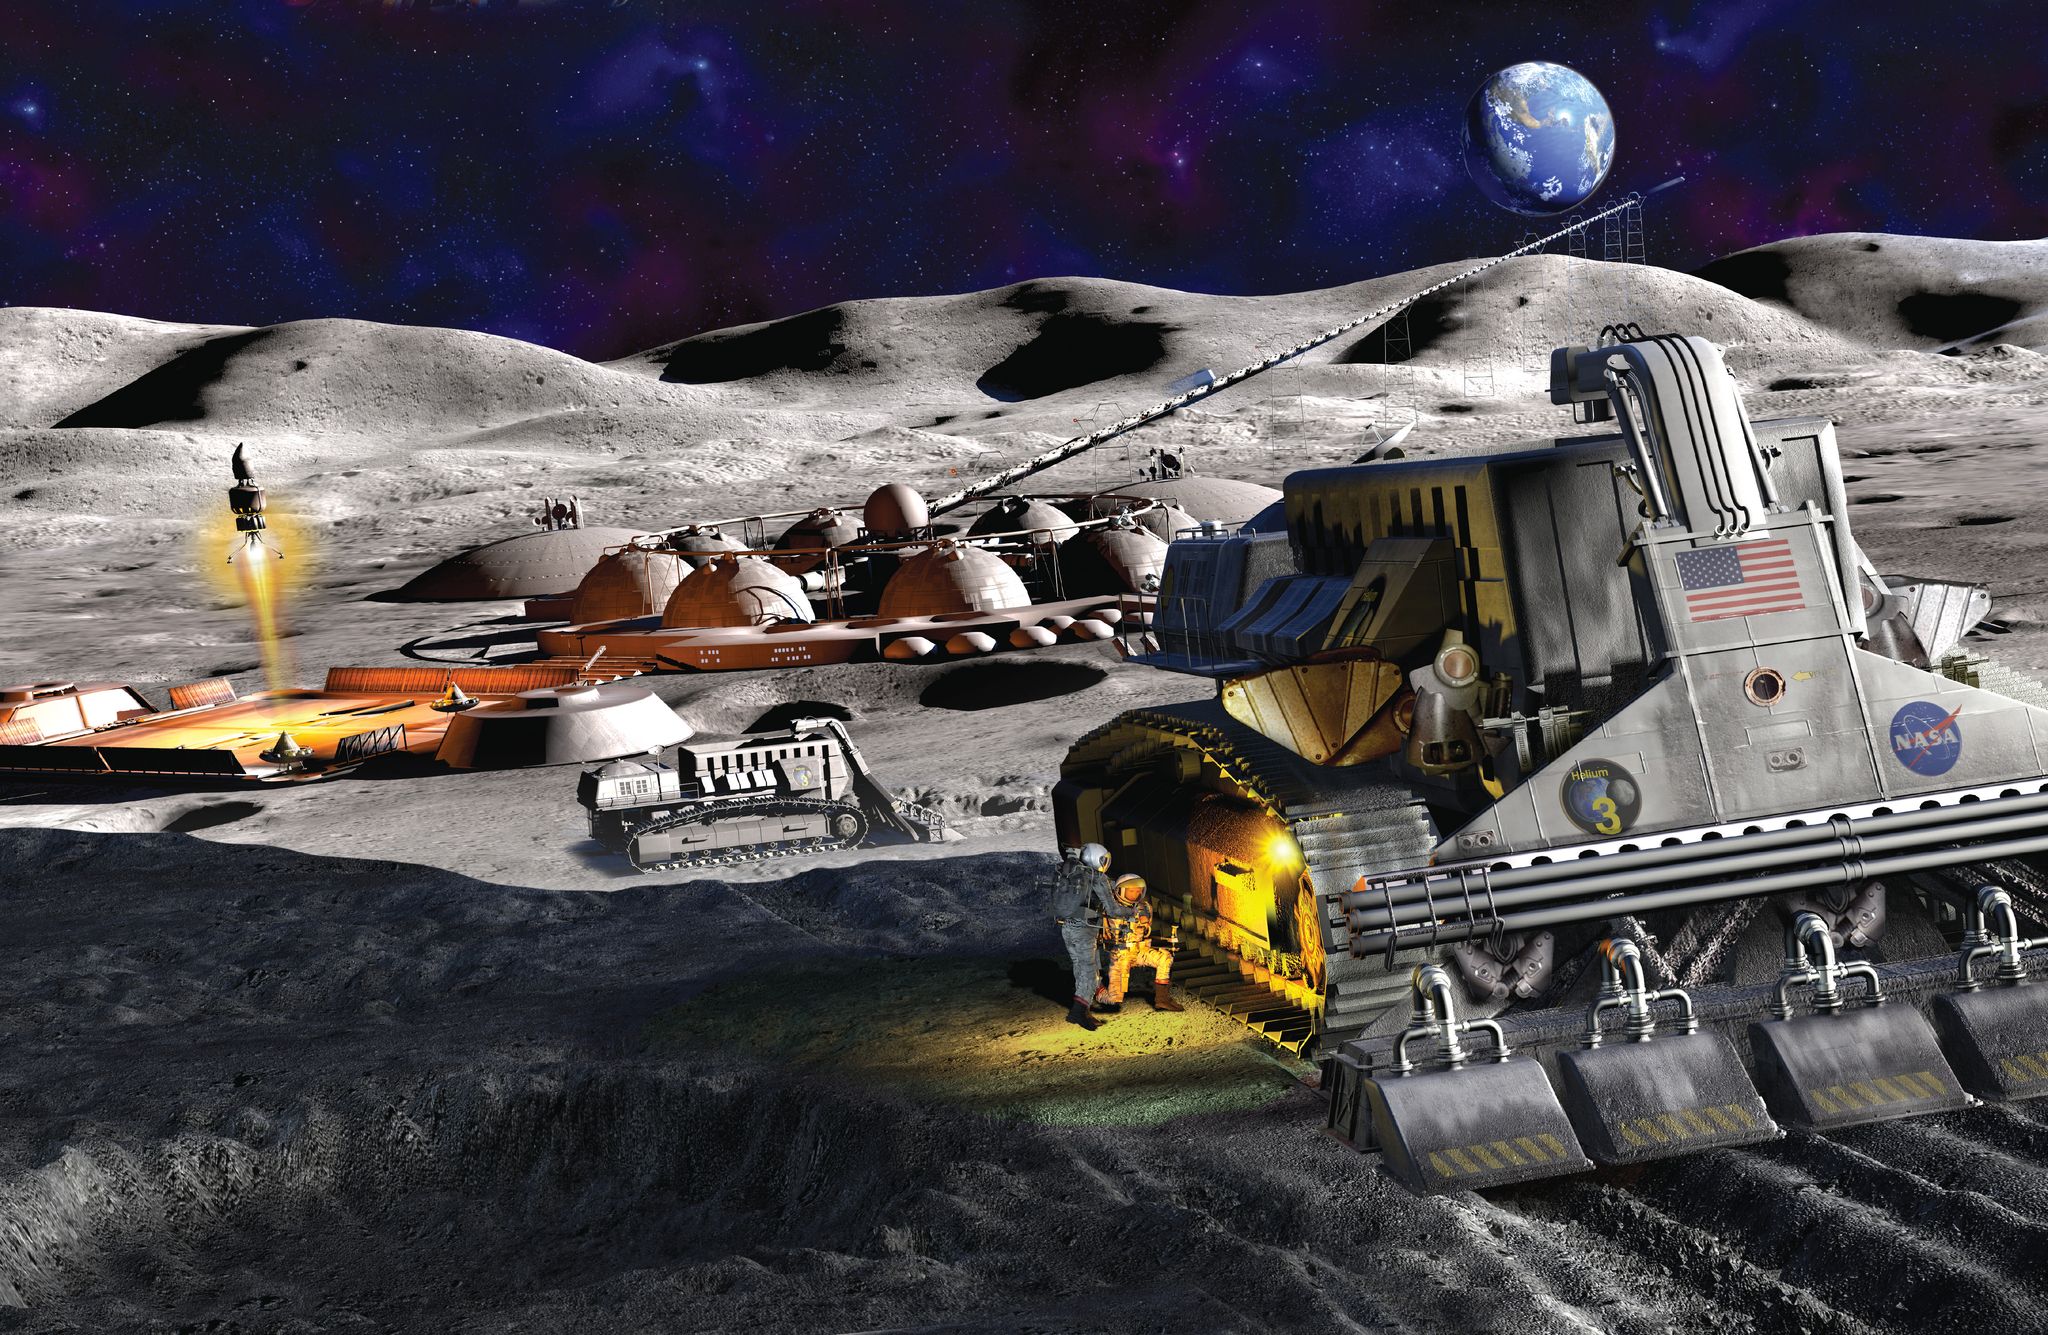 an illustration of a future human settlement on the surface of the moon